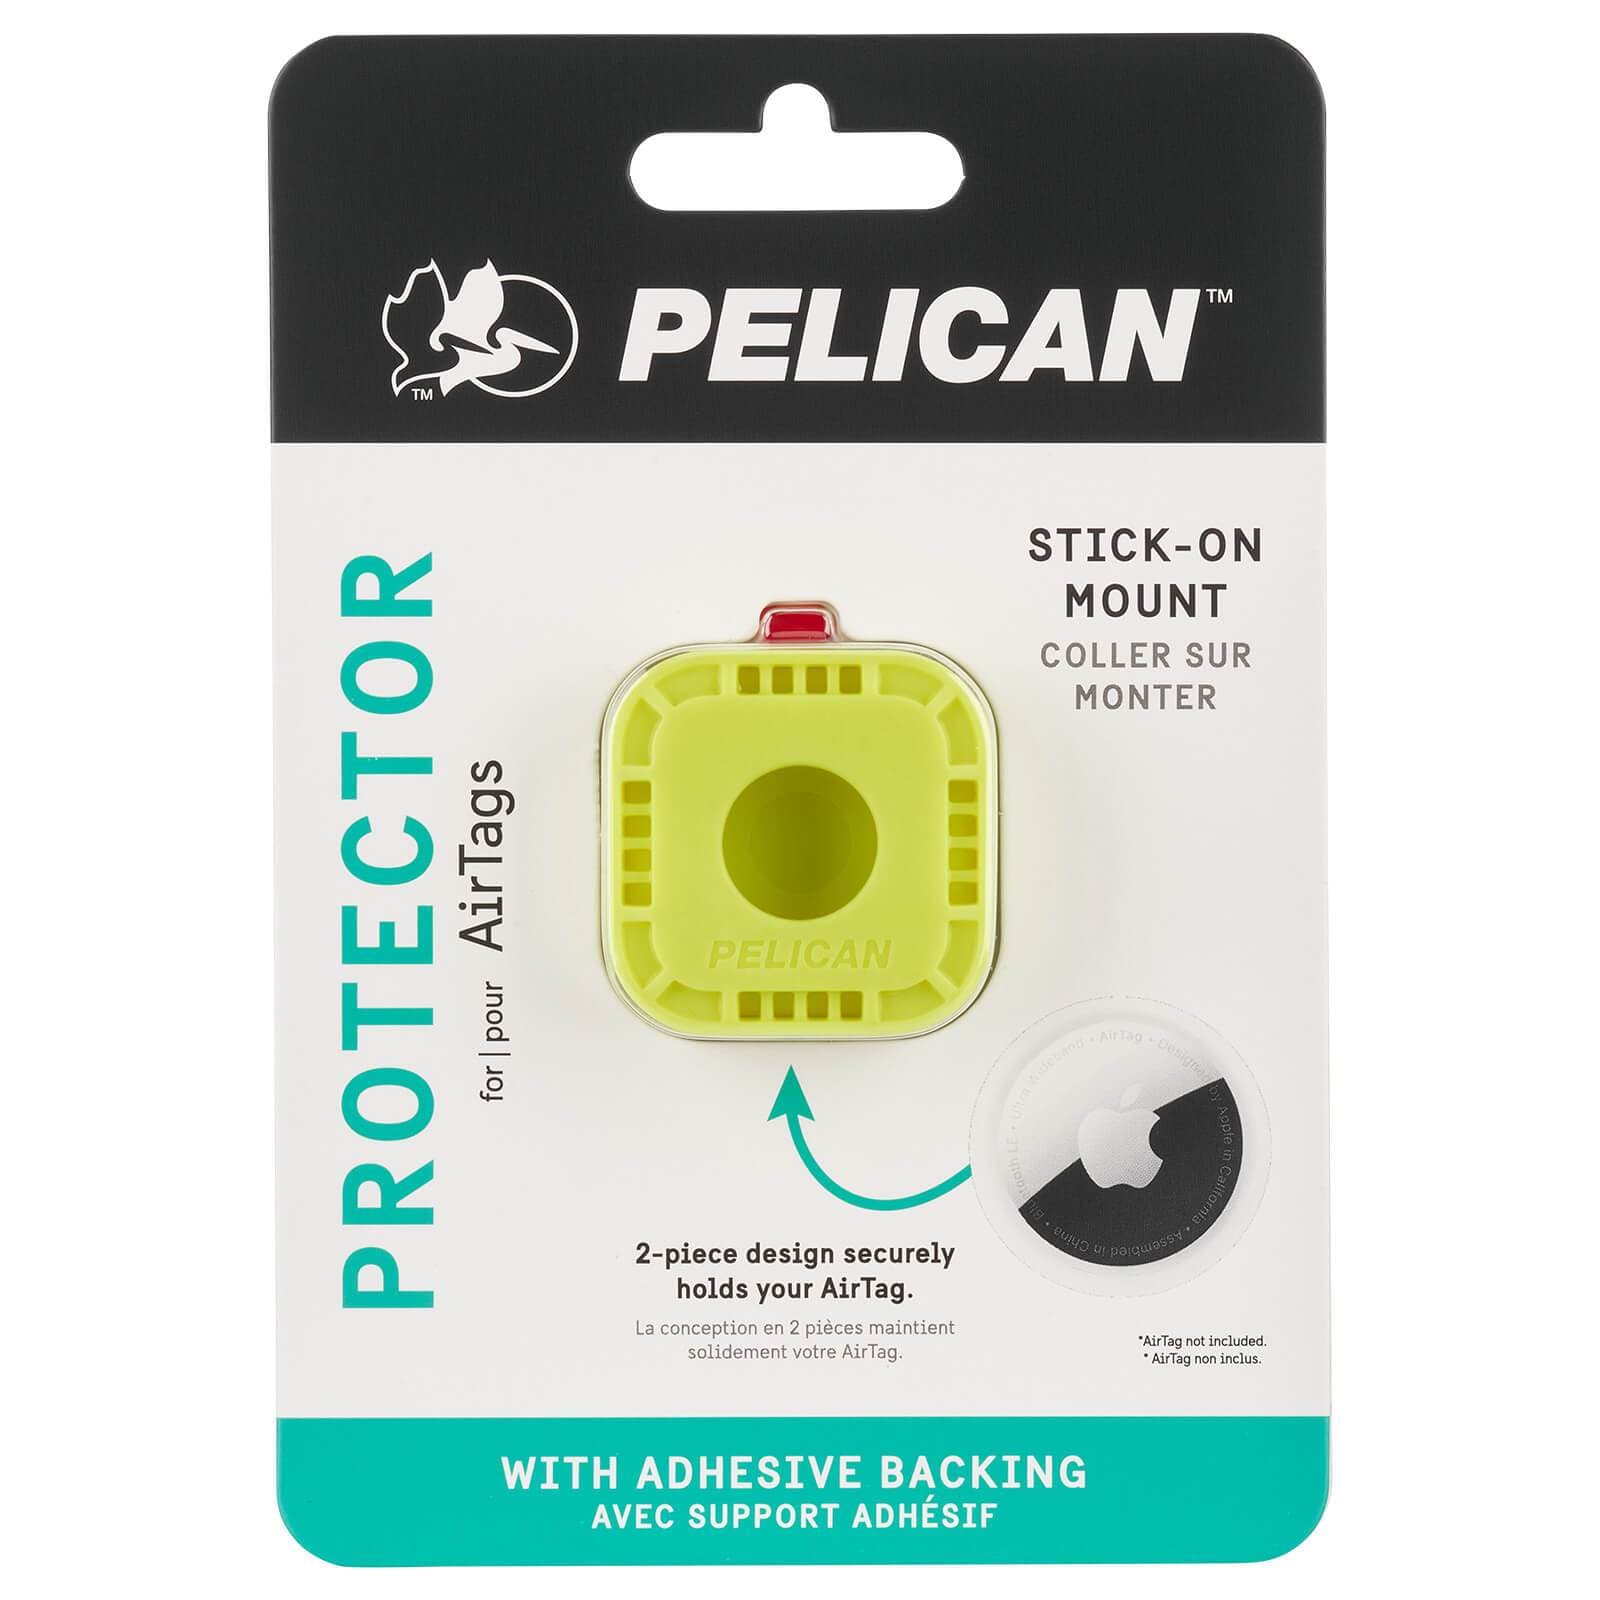 Pelican Protector for AirTags. Stick-on mount. 2-piece design securely holds your AirTag with Adhesive Backing. color::Hi-Vis Yellow